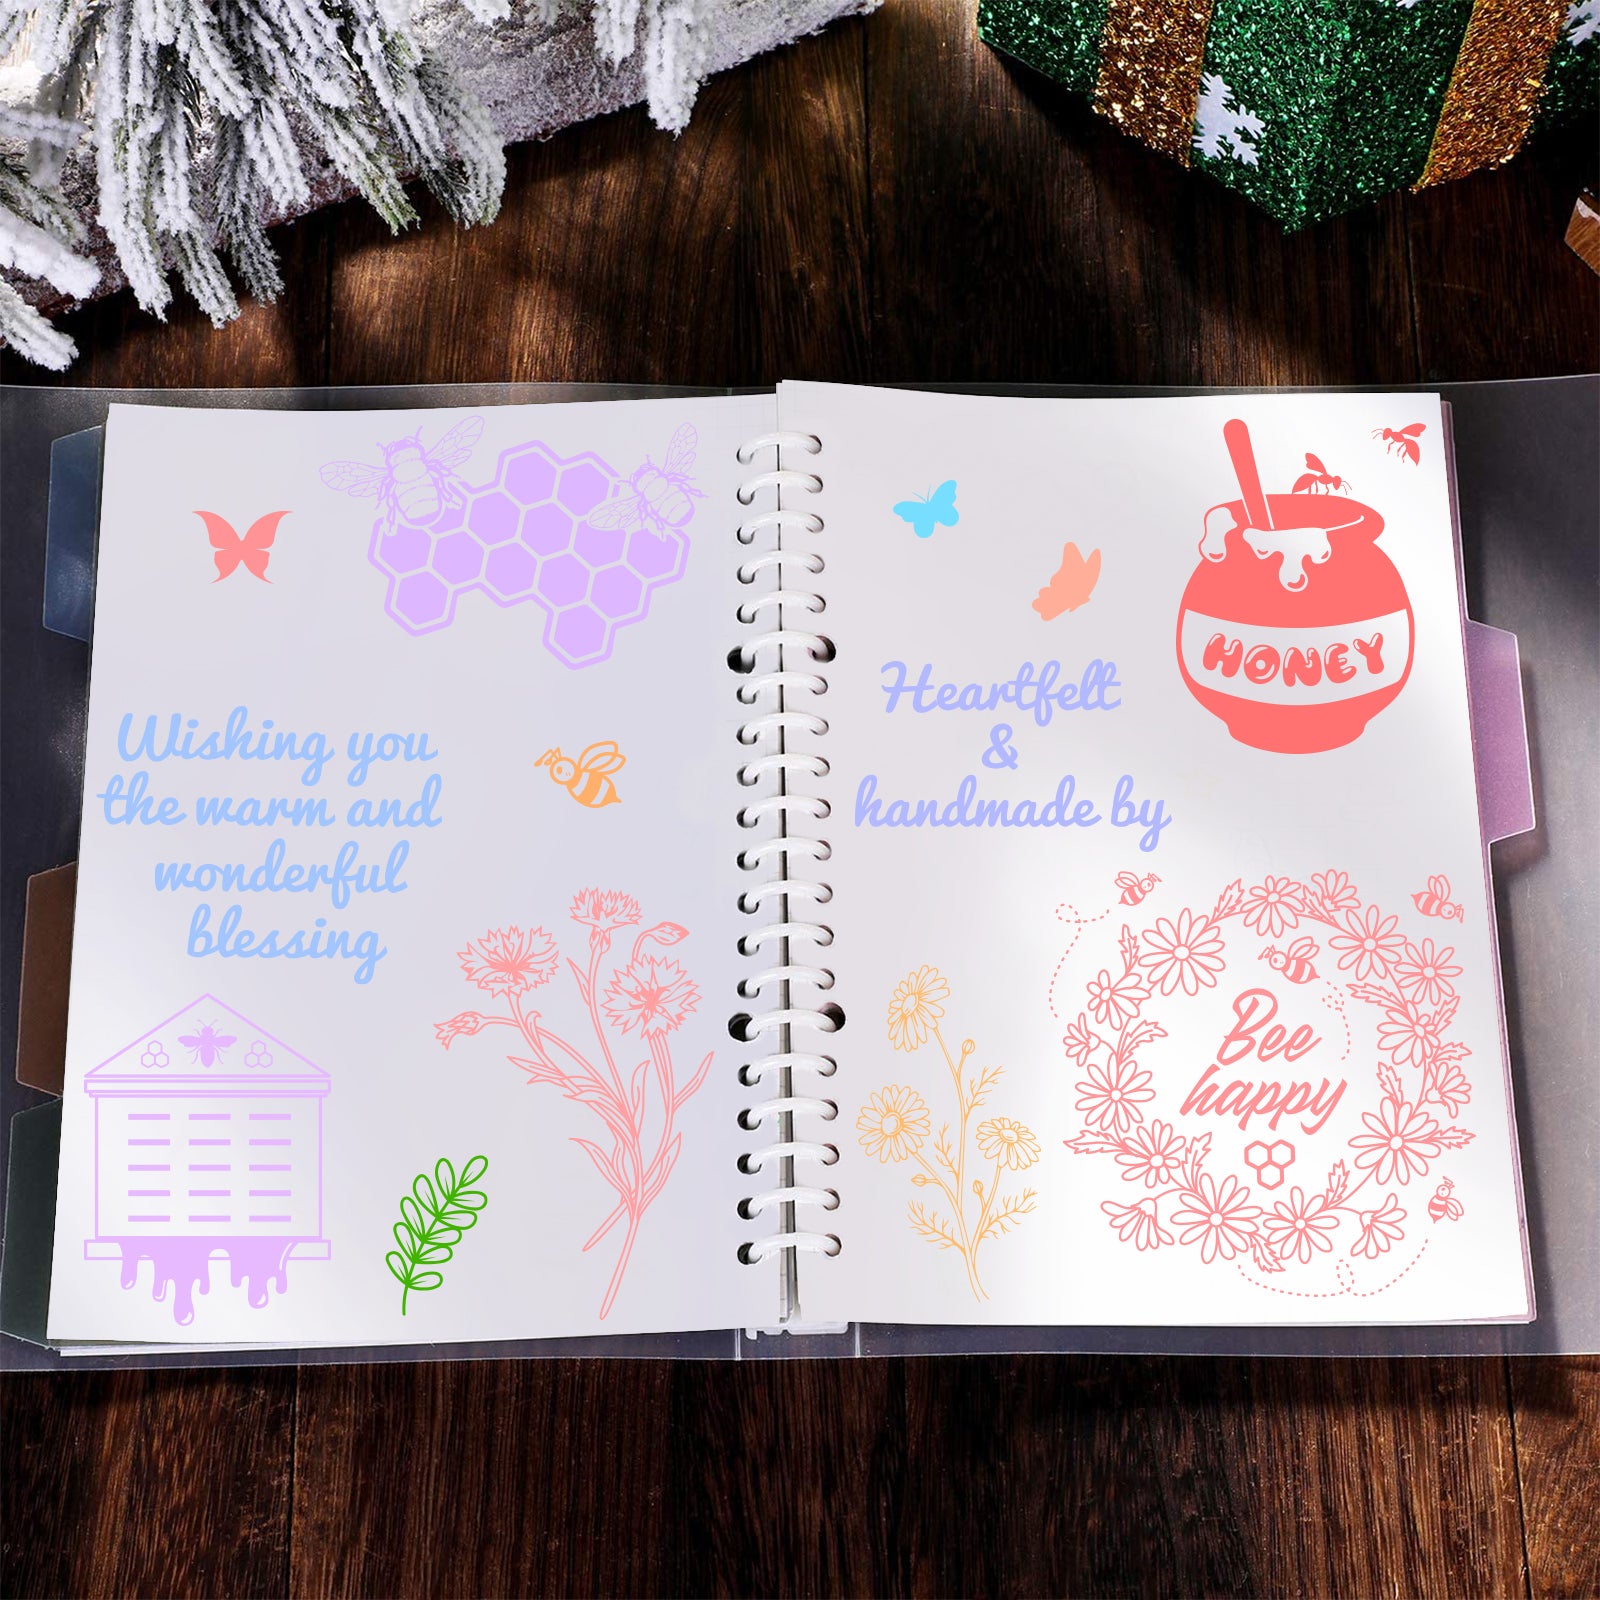 GLOBLELAND Bee Happy Clear Stamps Transparent Silicone Stamp for Card Making Decoration and DIY Scrapbooking